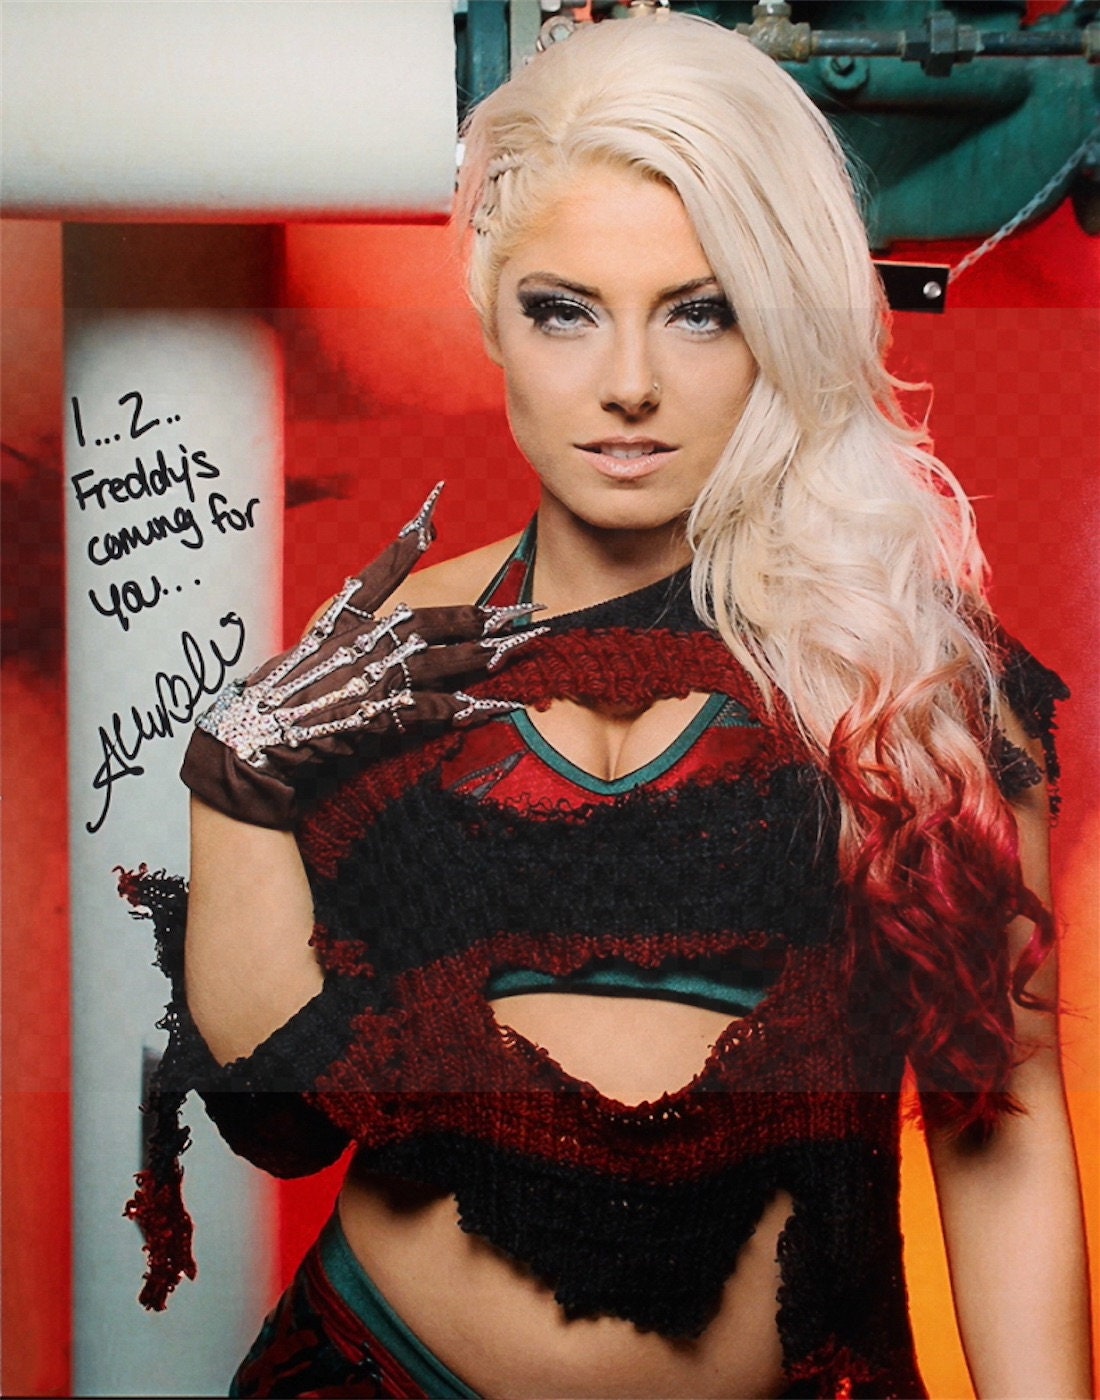 Autographed Wrestling Photos Alexa Bliss Wwe Diva Signed Autograph 8x10 Photo #4 Wrestling Ink 